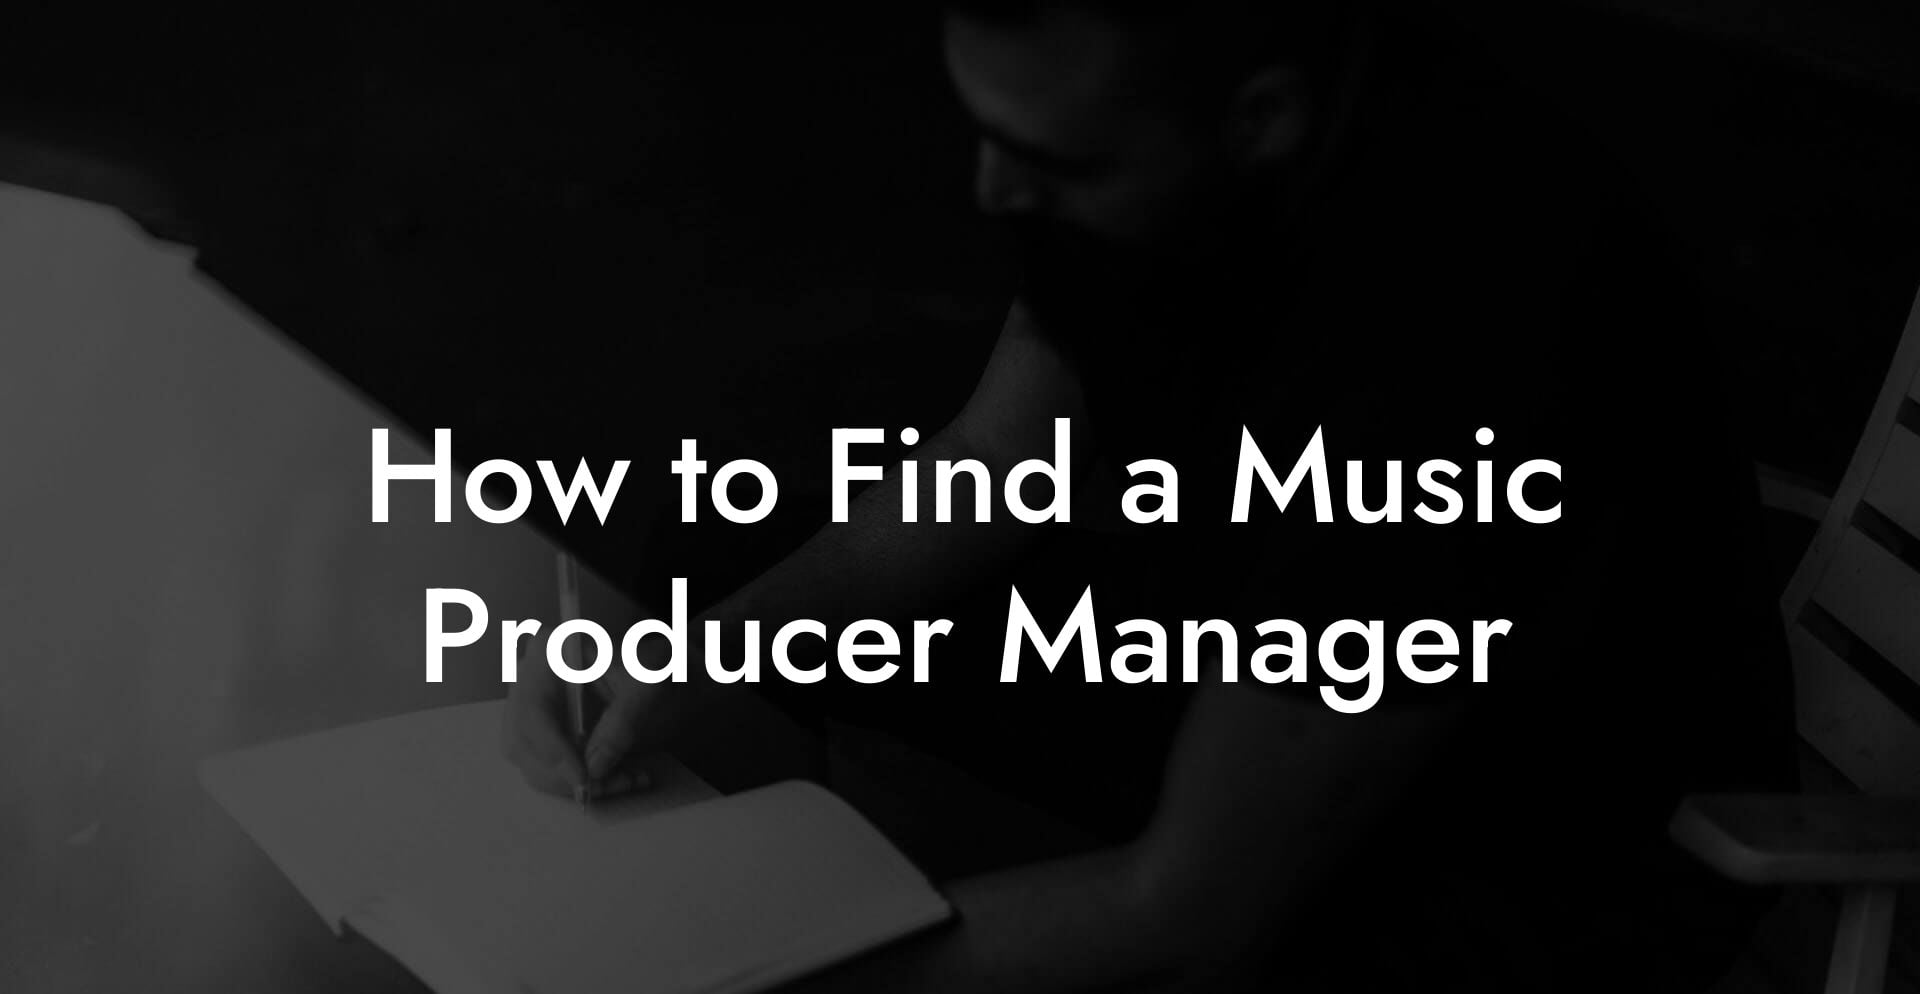 How to Find a Music Producer Manager